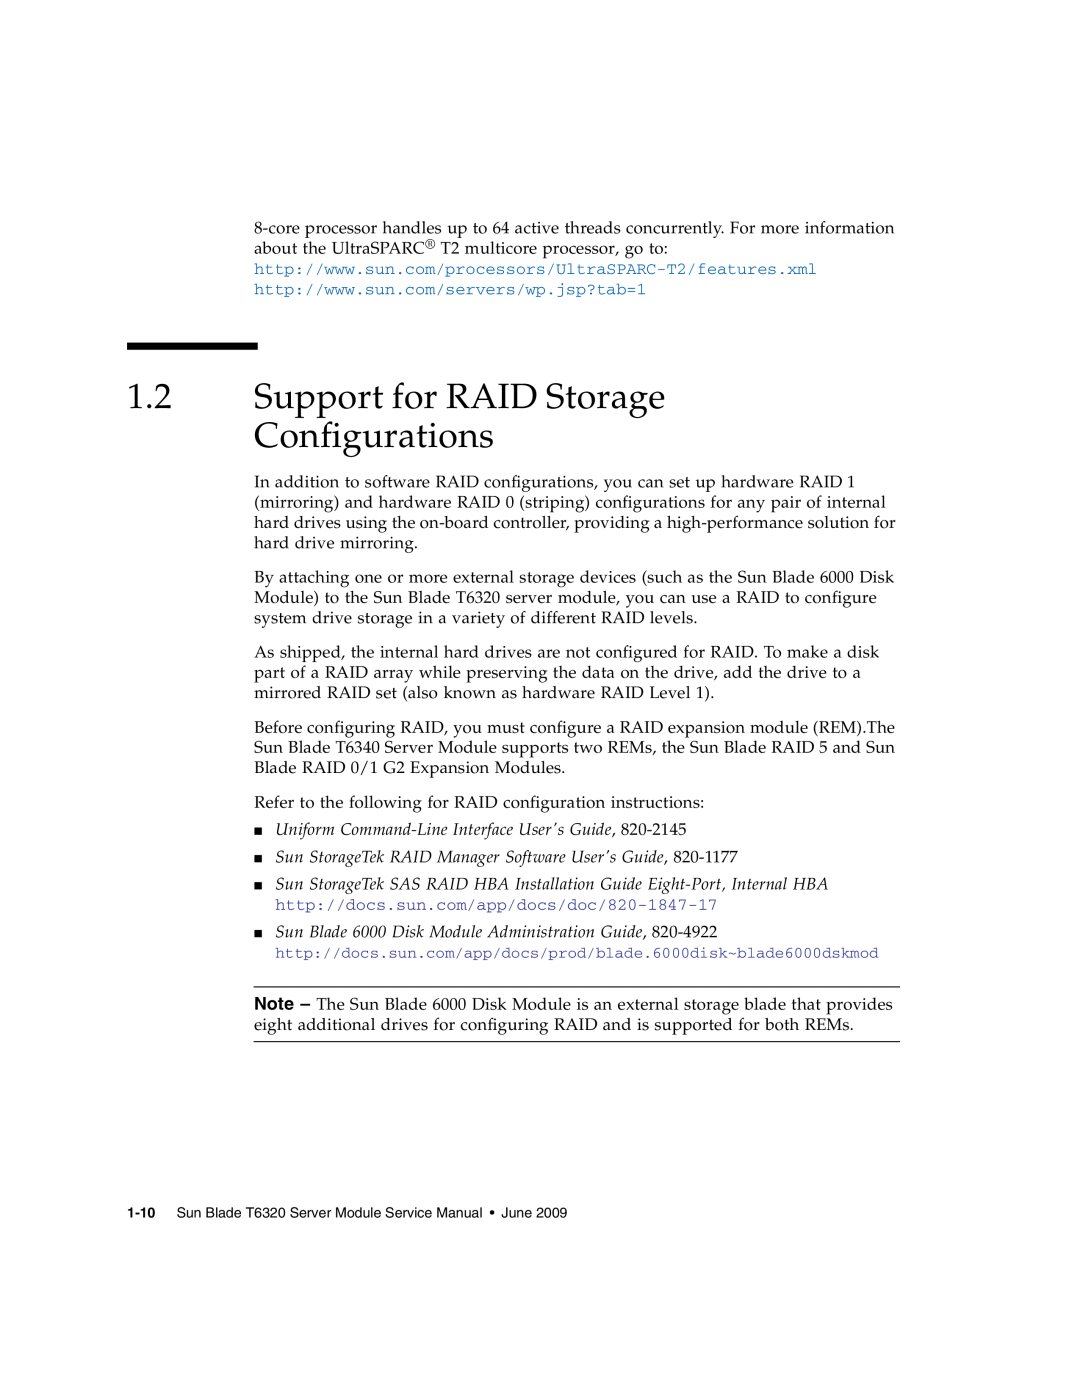 Sun Microsystems T6320 service manual Support for RAID Storage Configurations, Uniform Command-Line Interface Users Guide 